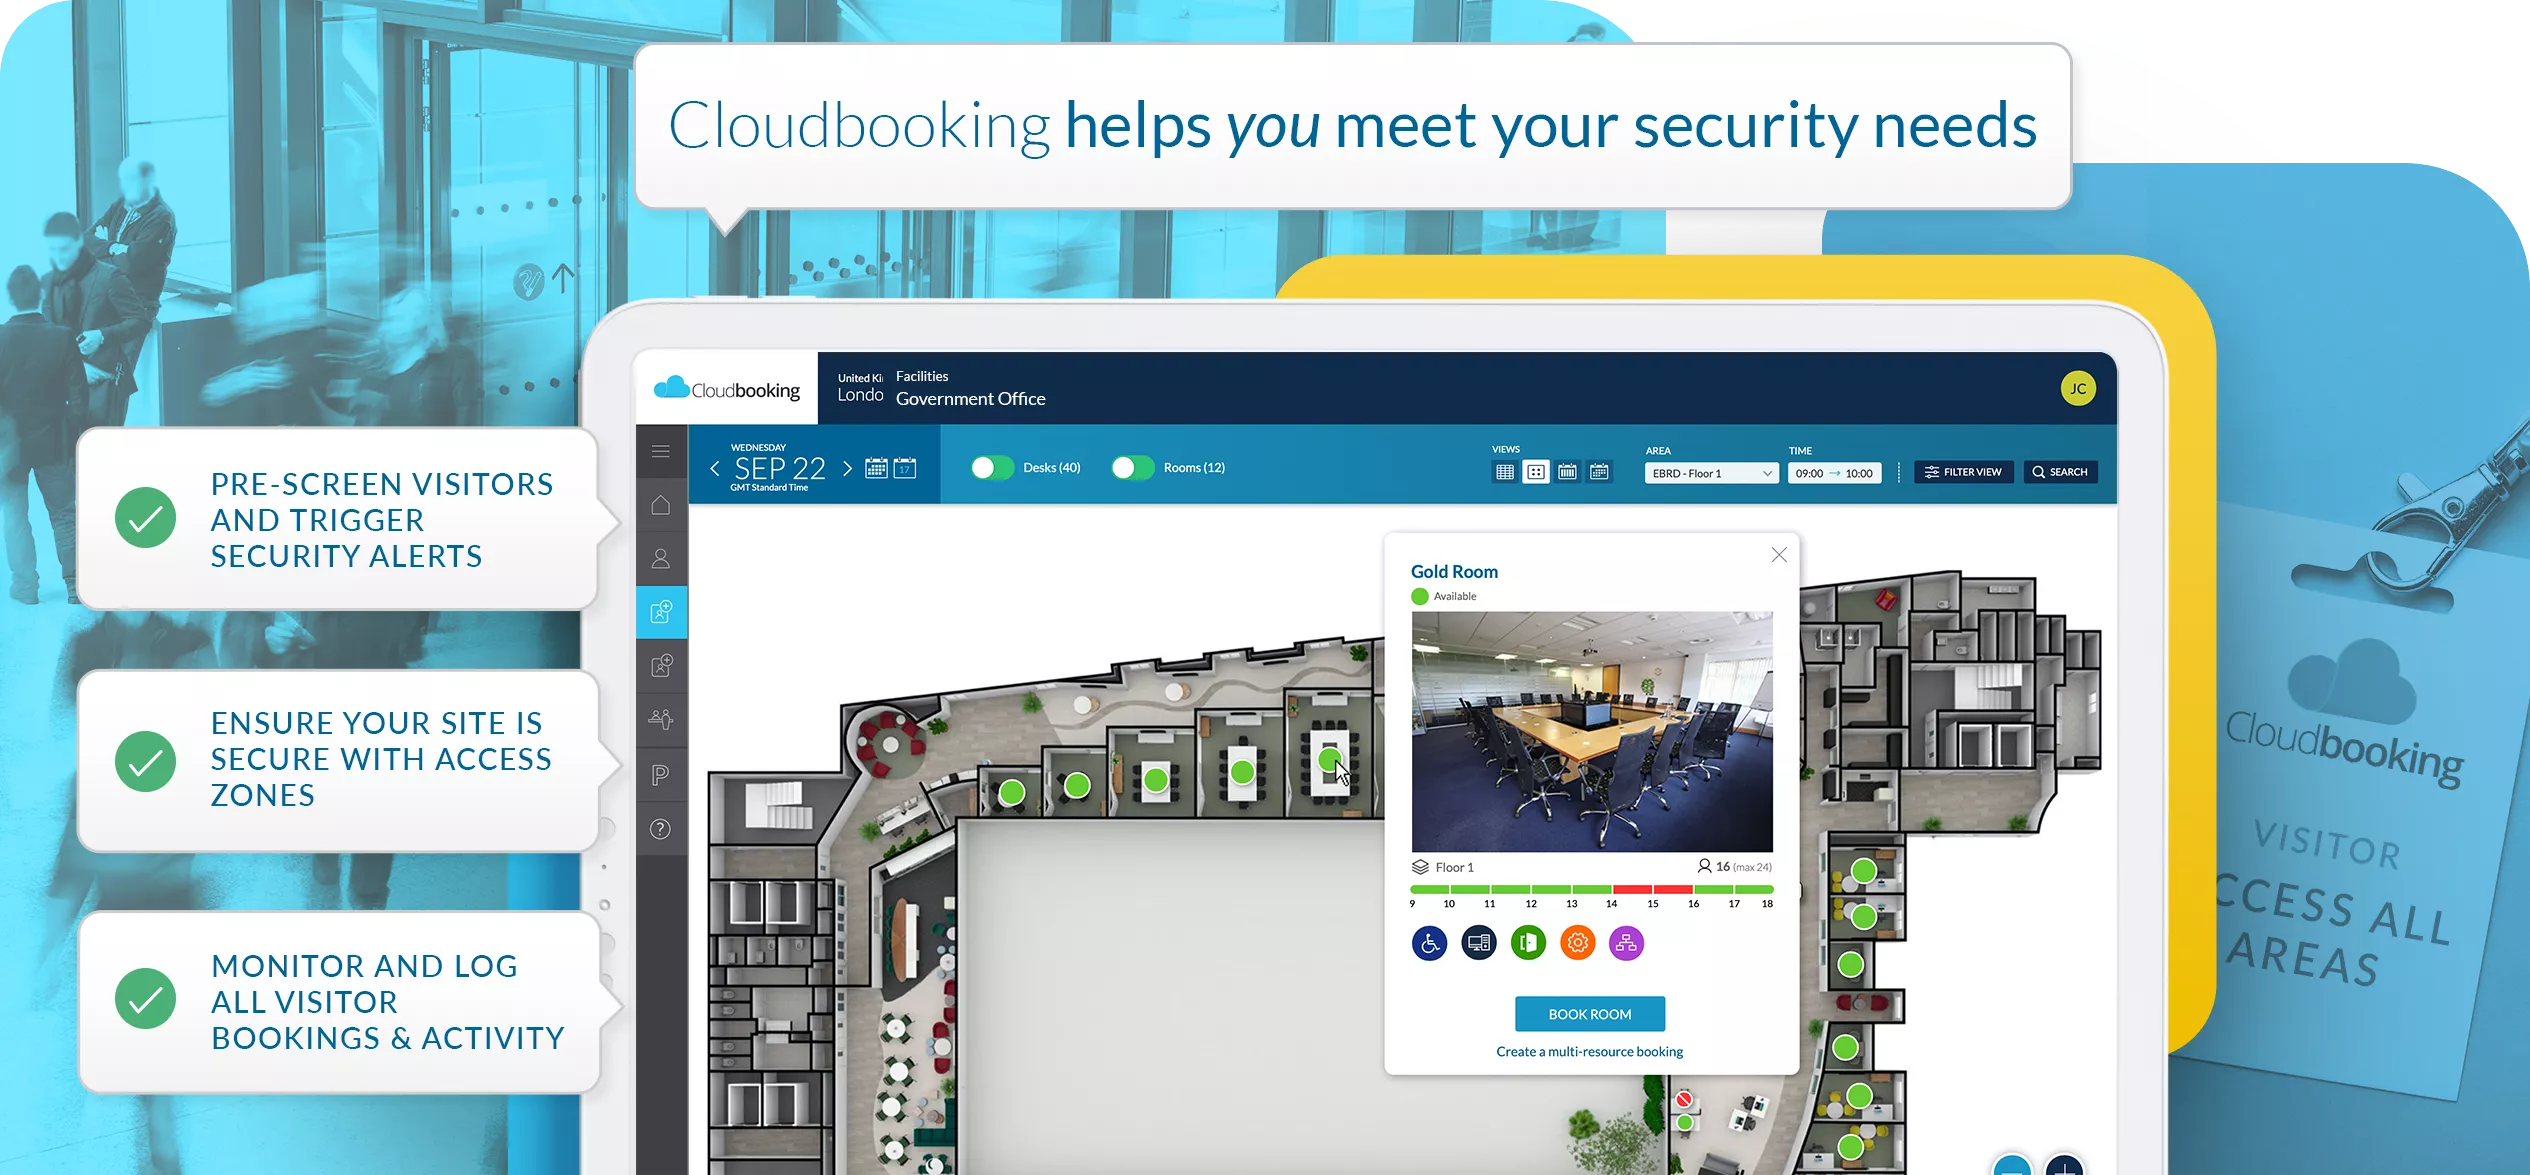 Cloudbooking helps you meet your secure visitor management needs